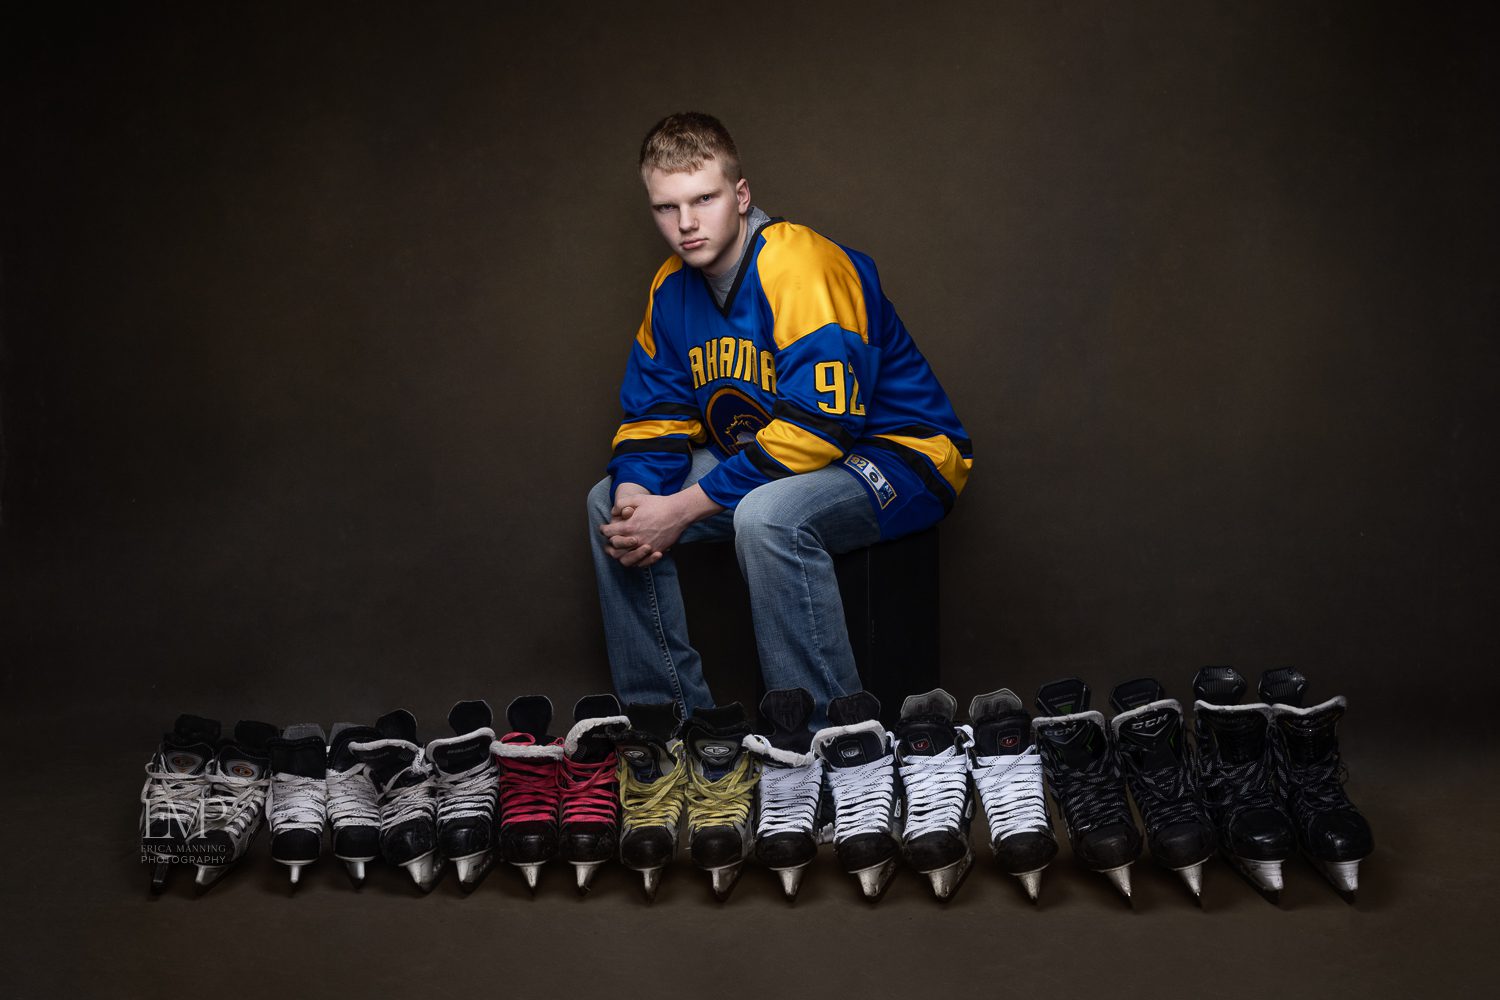 High school senior hockey player with all of his skates